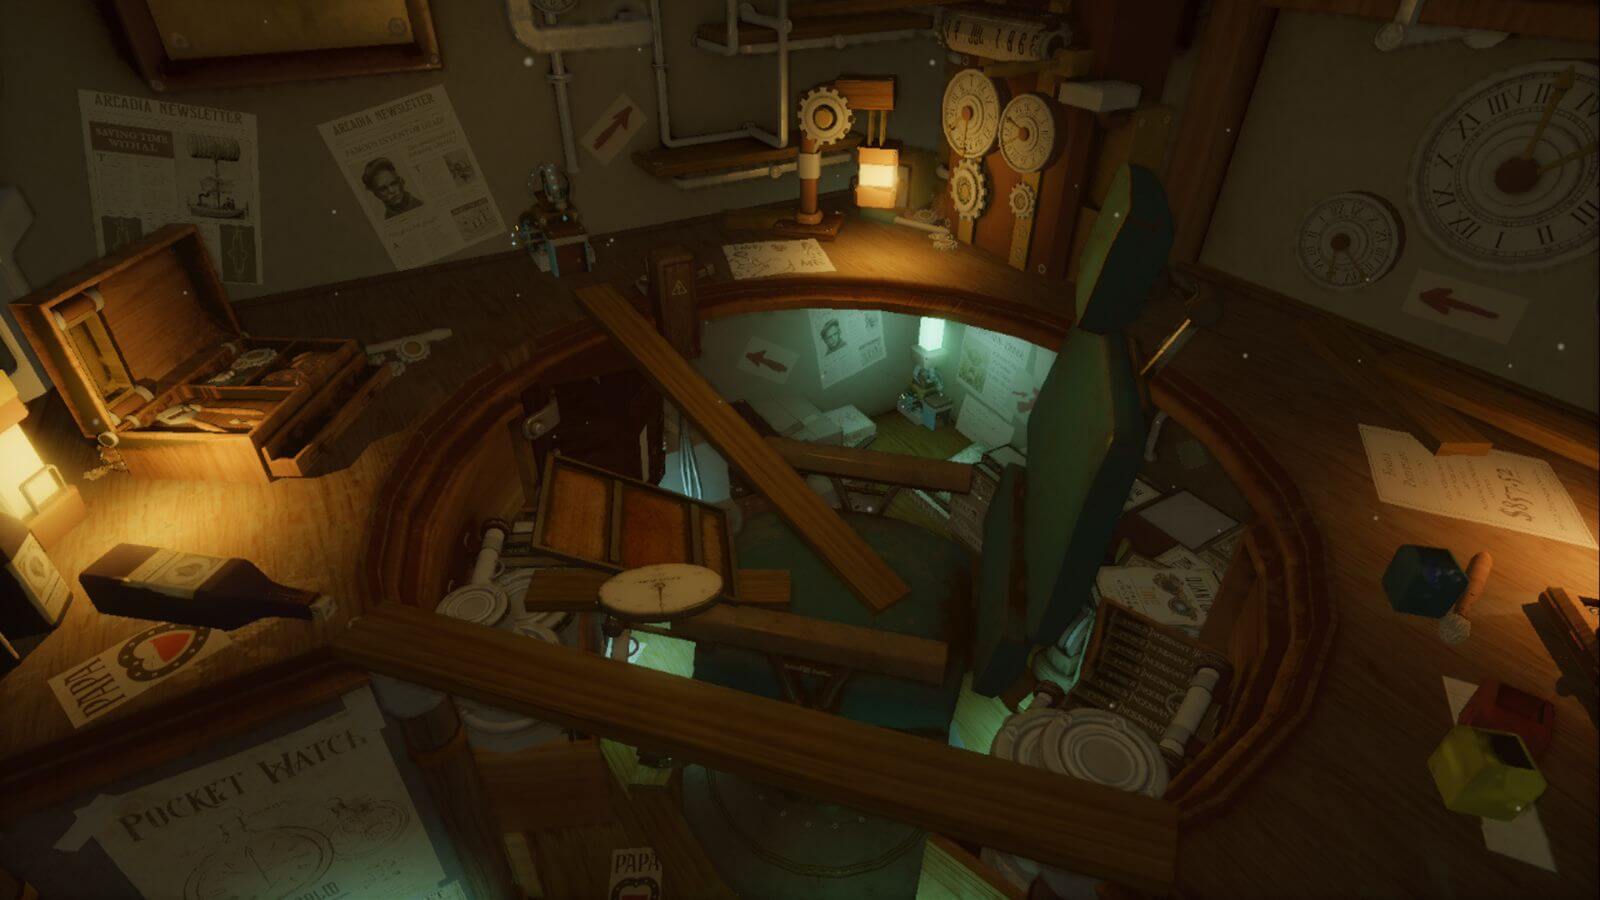 One of the levels in Minute that contains a messy desk that surrounds an equally messy chair.